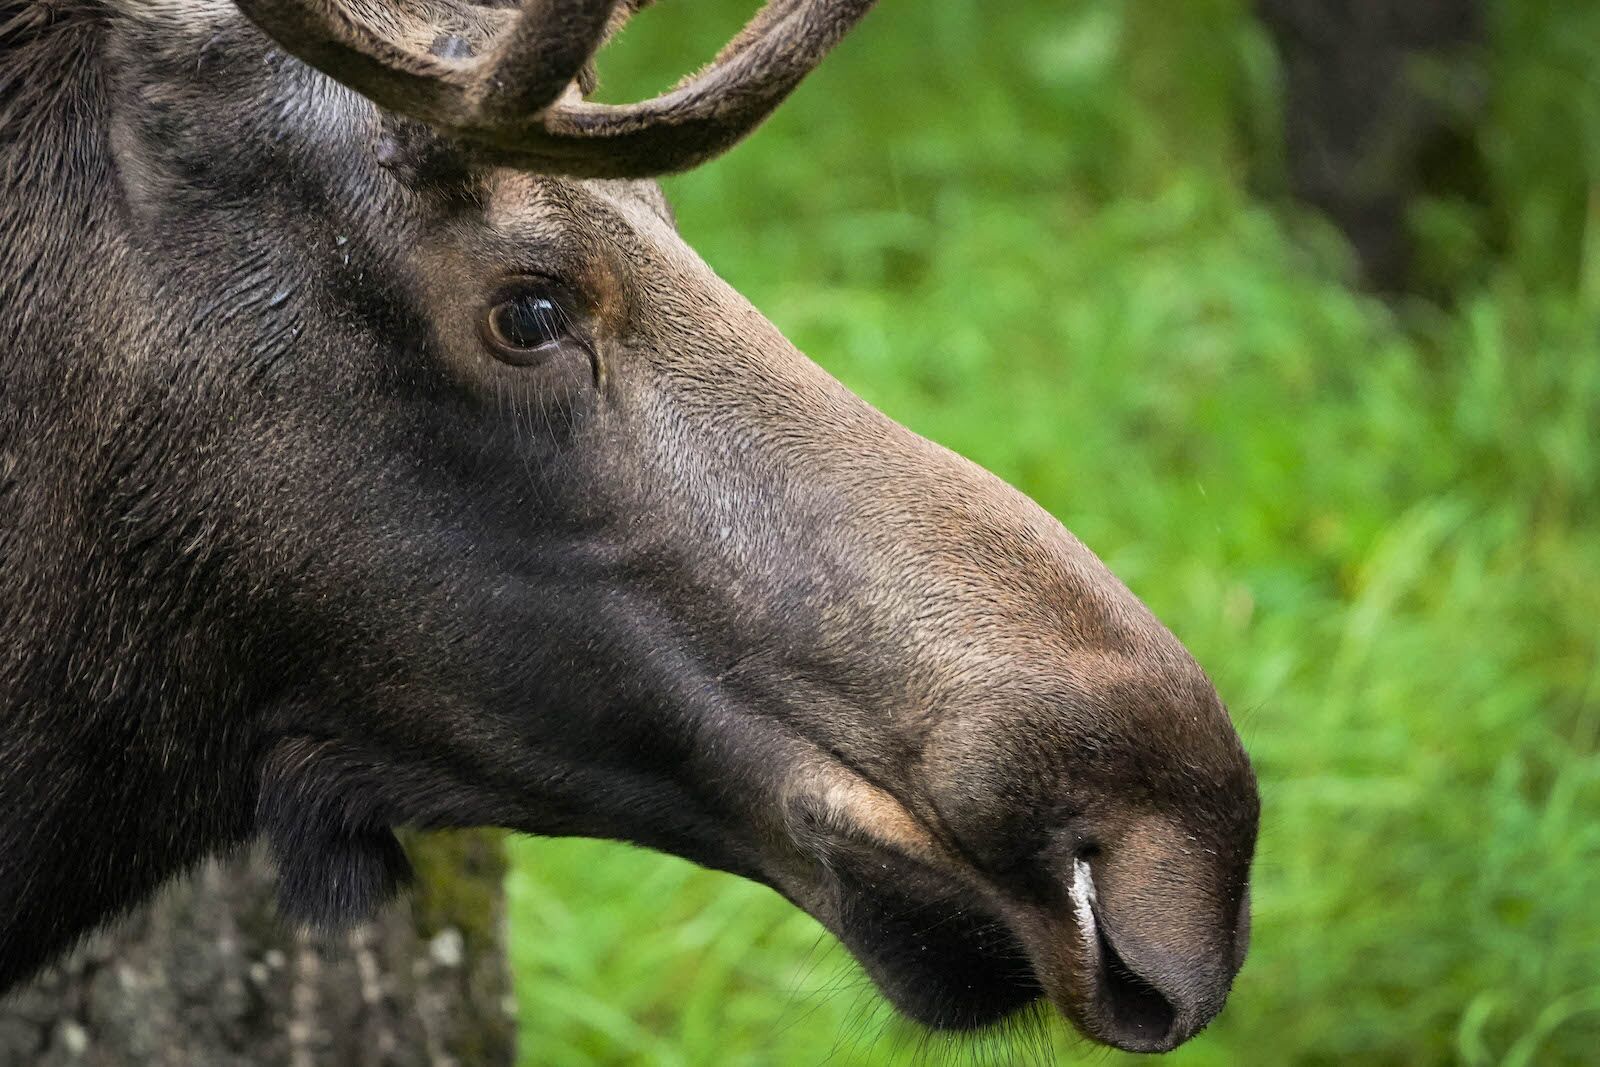 sony a7iv review - moose wildlife shot